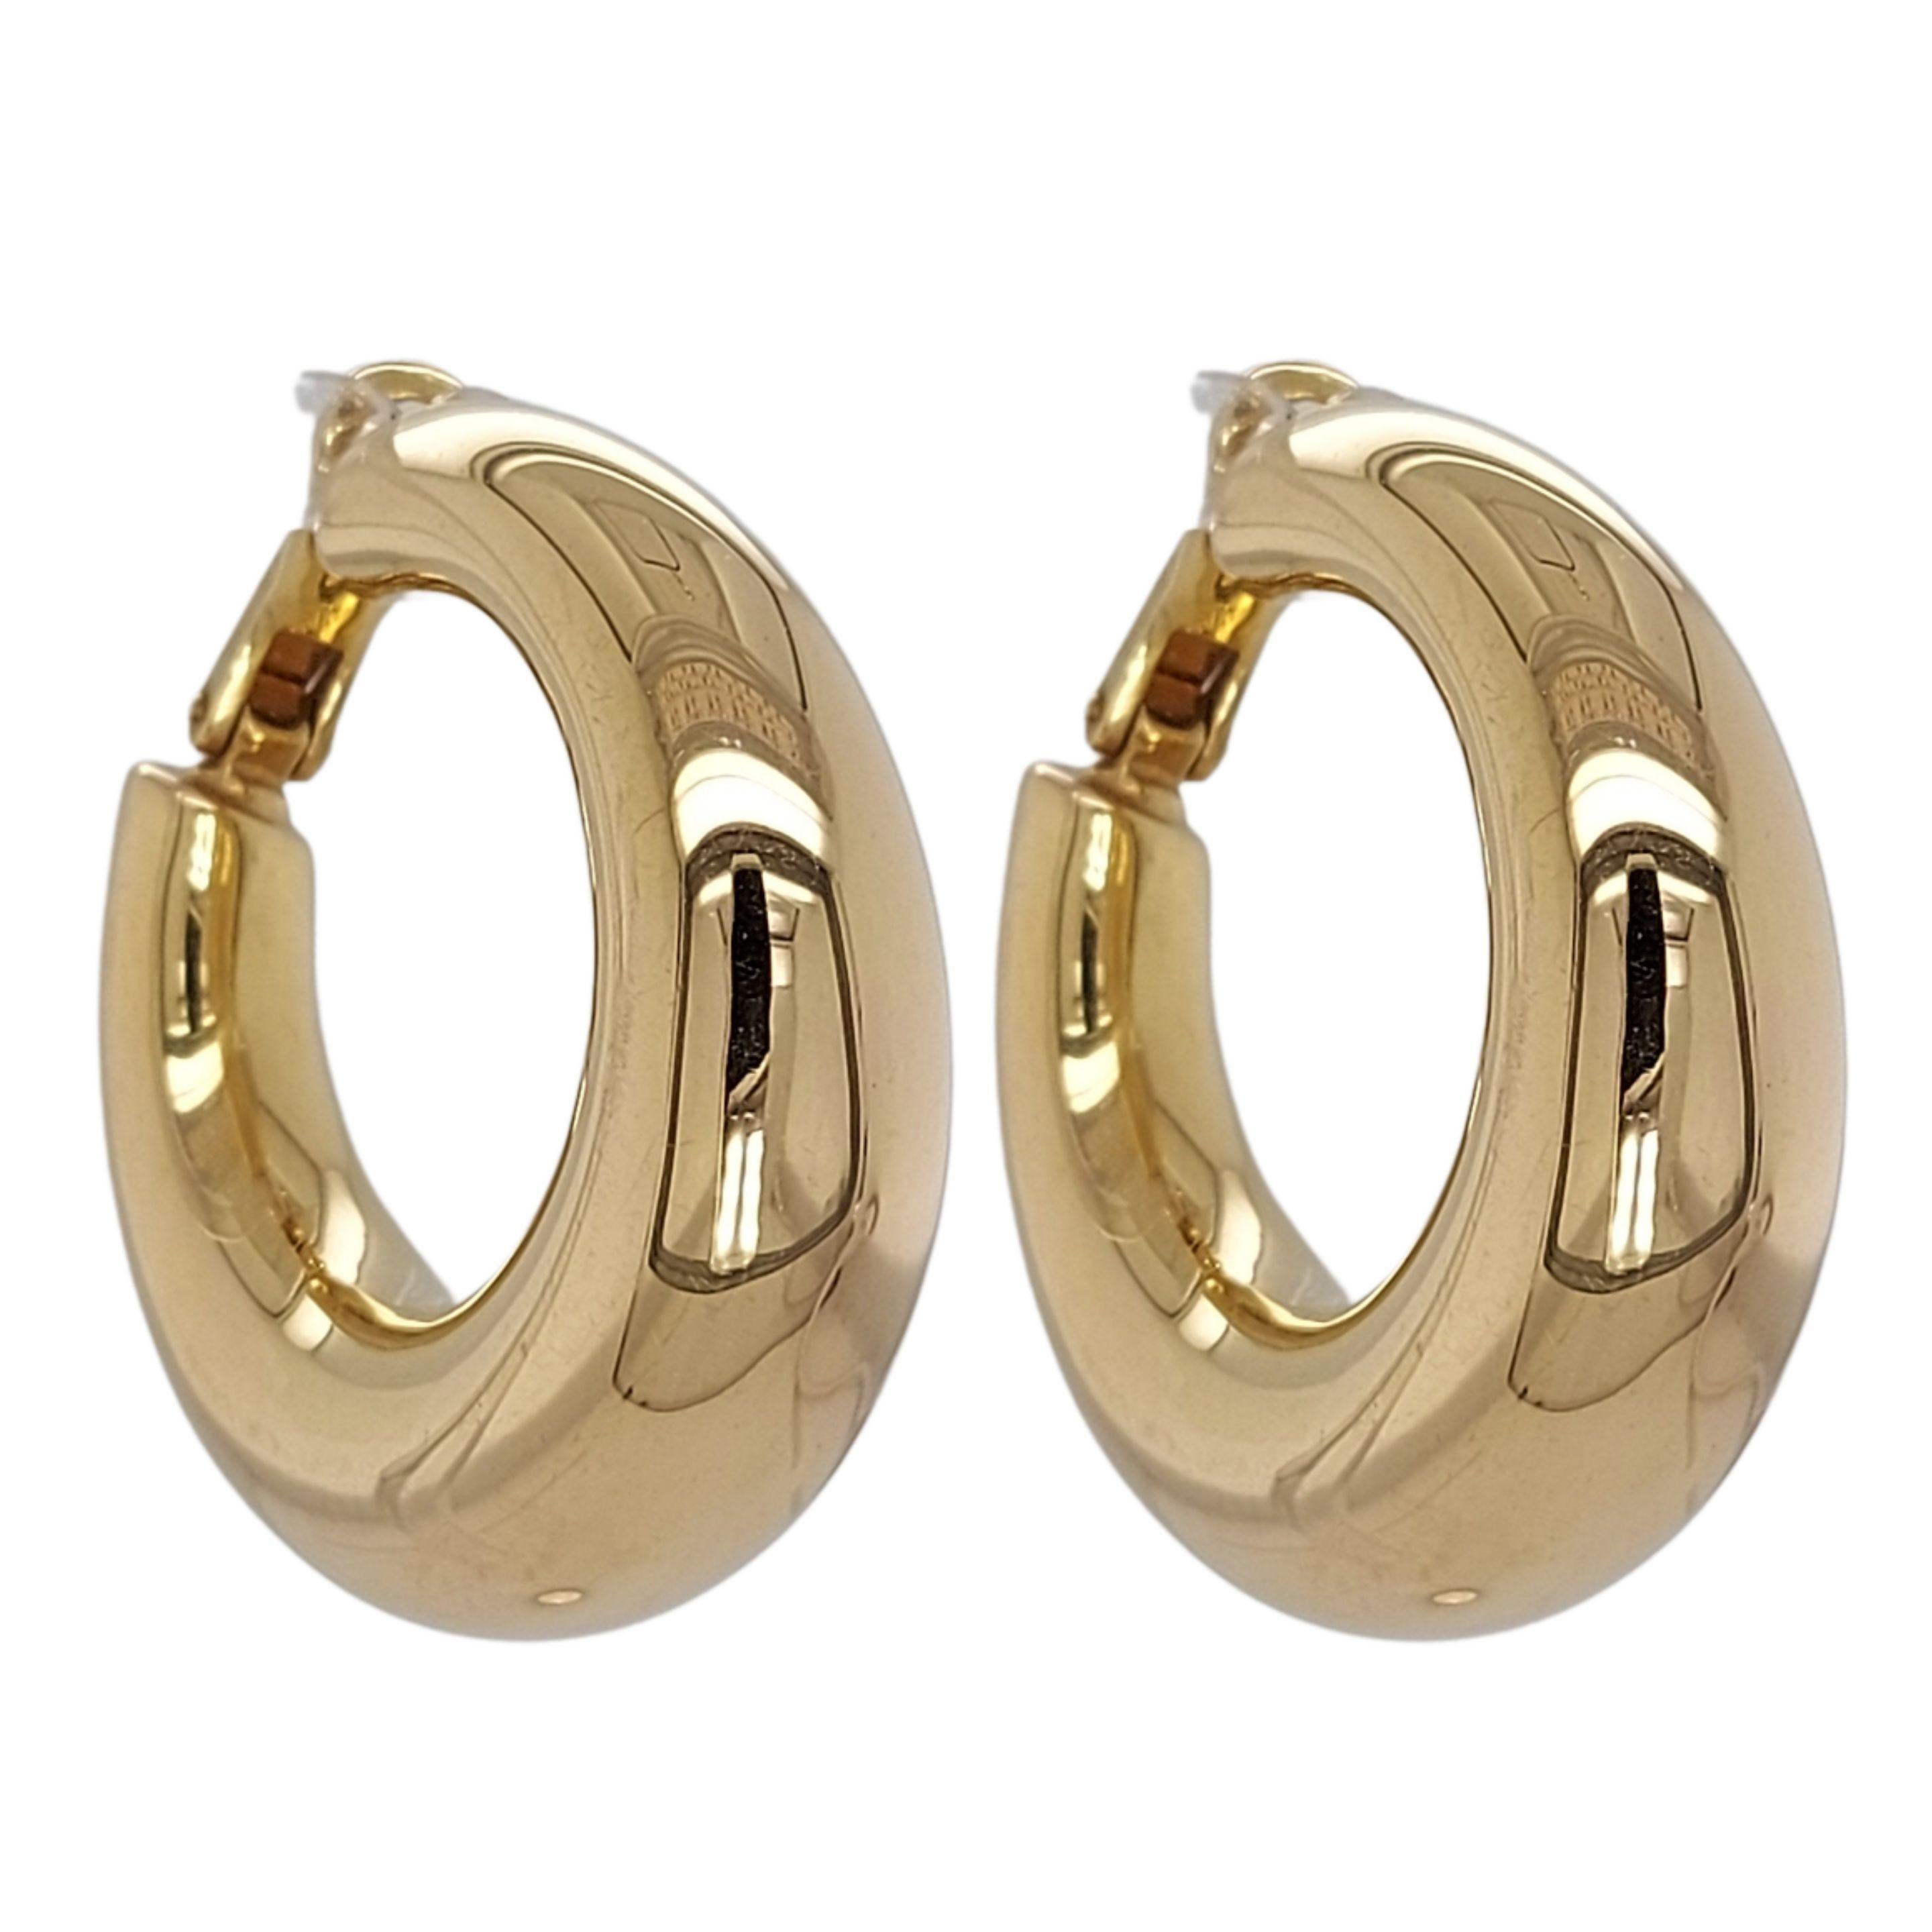 Gorgeous Vintage Chaumet Paris 18kt yellow gold Hoop Earrings

Material: 18kt Yellow Gold

Measurements: diameter 34 mm 

Total weight: 14,2 grams / 0.500 oz / 9.1 dwt

Stamped with the Chaumet maker's mark, a serial number and a hallmark for 18k